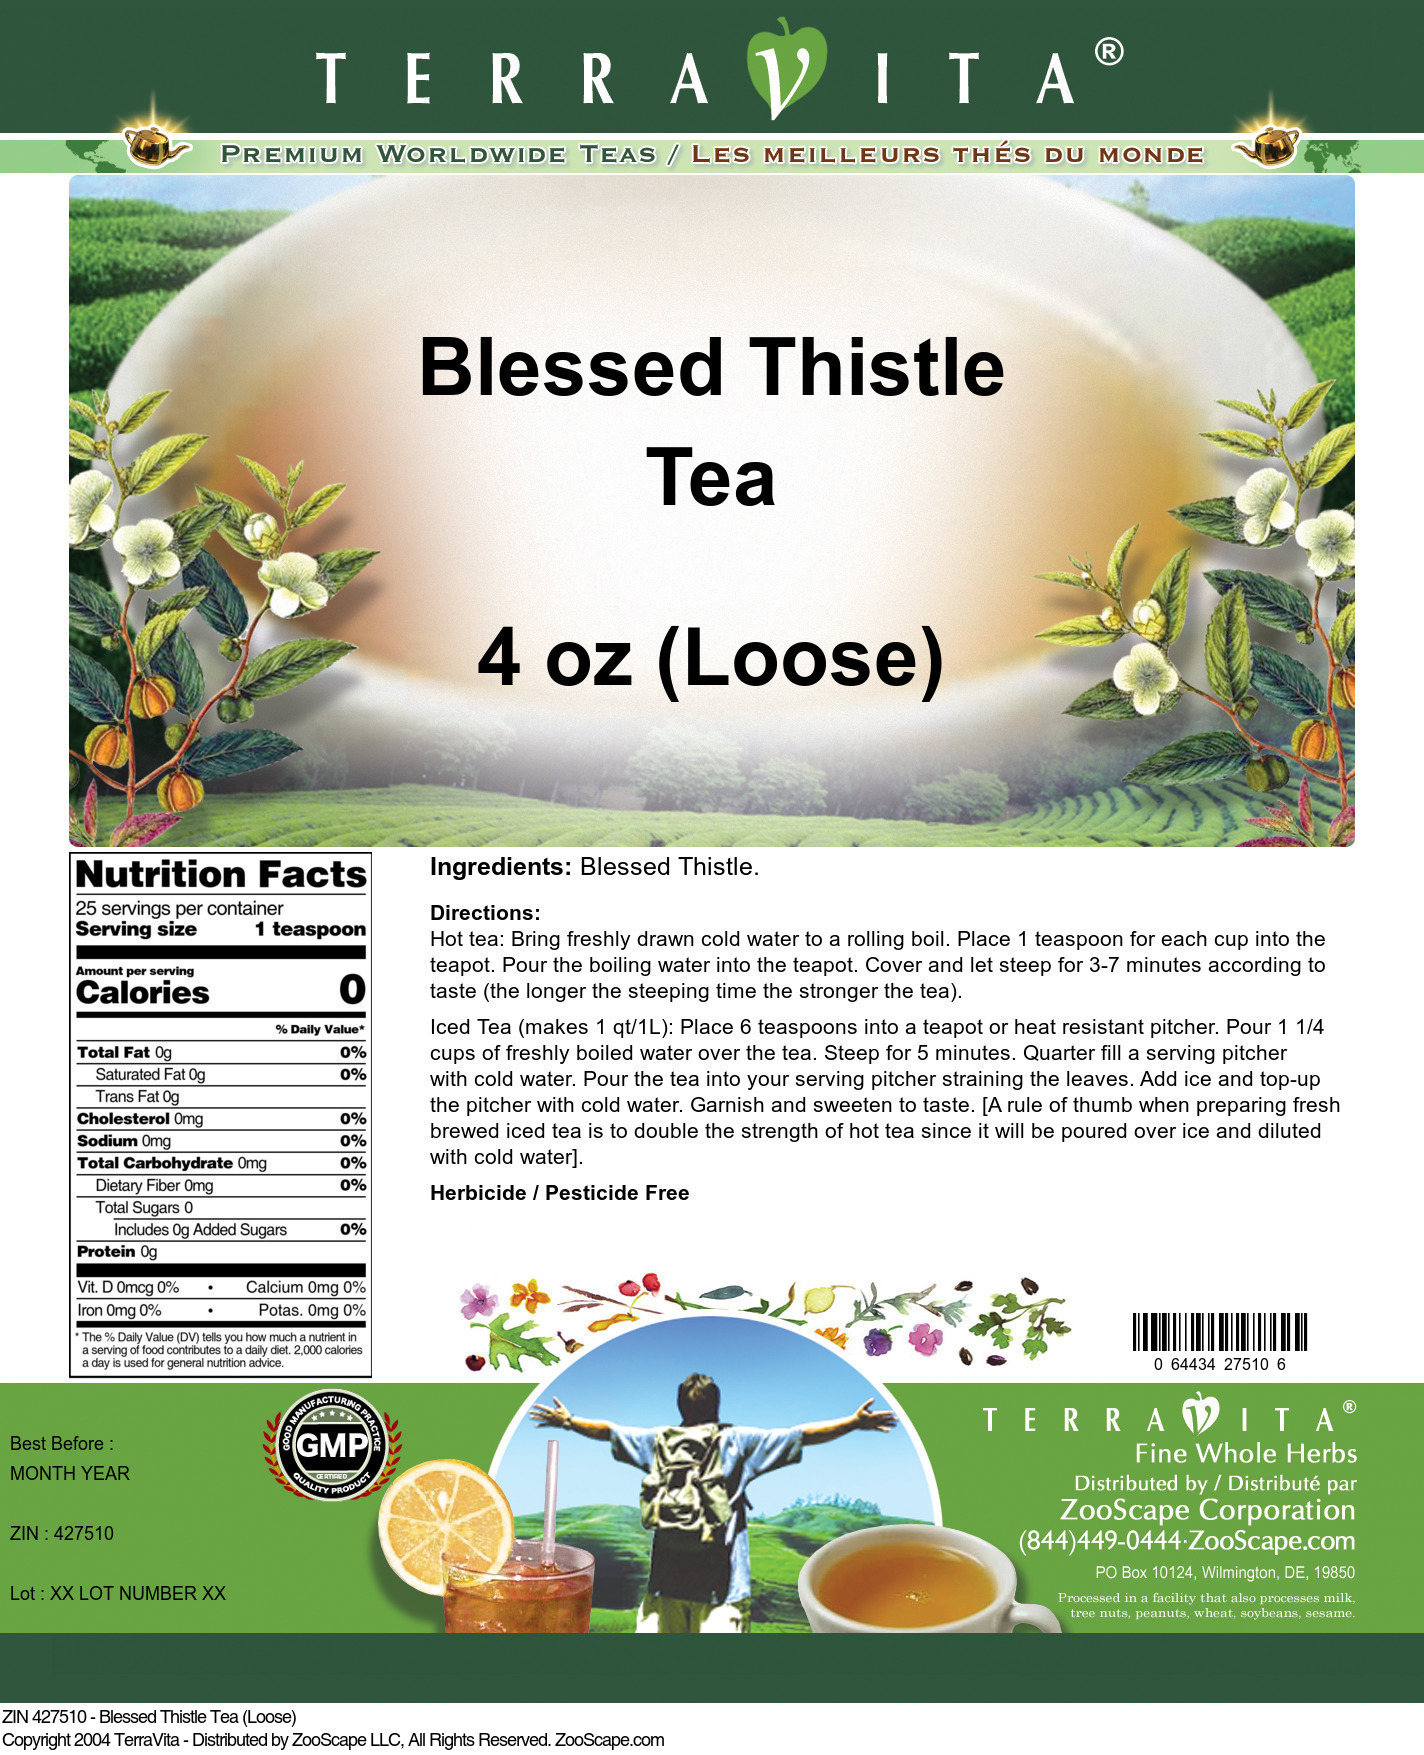 Blessed Thistle Tea (Loose) - Label